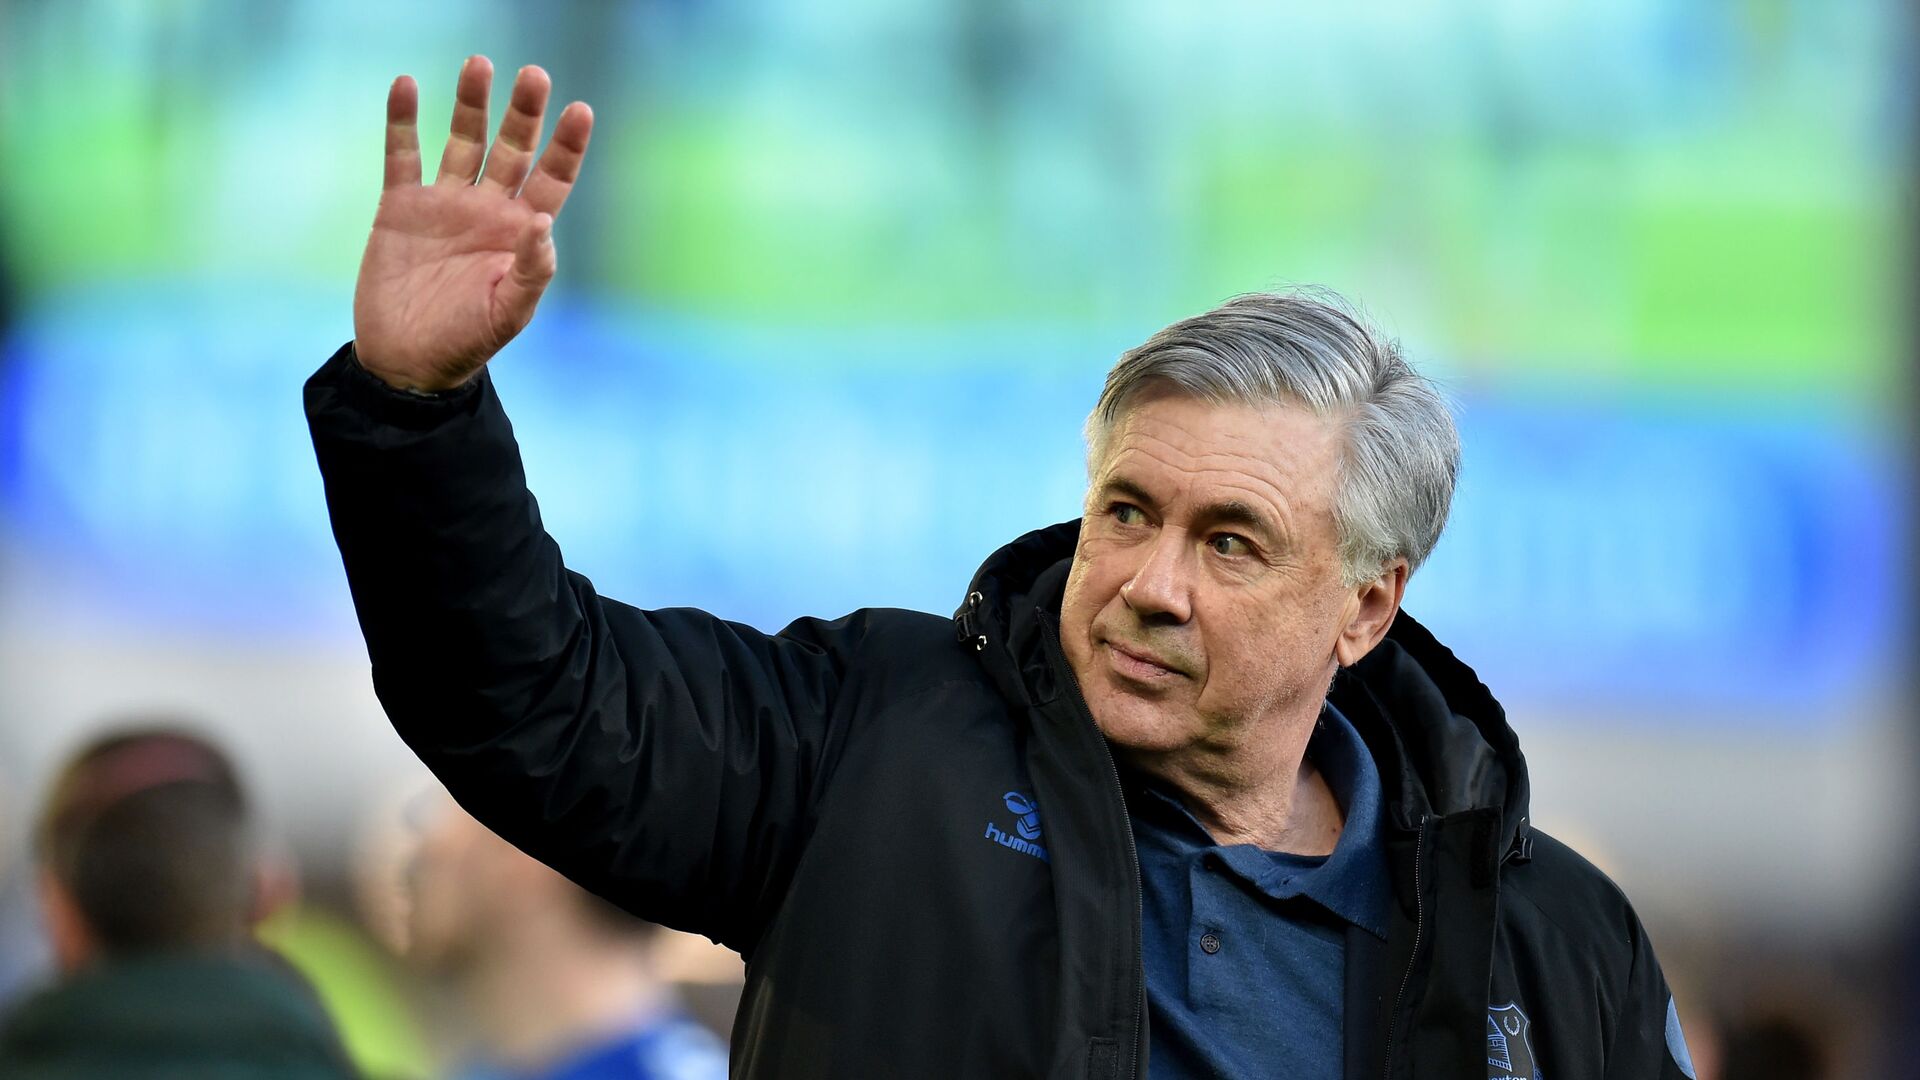 Soccer Football - Premier League - Everton v Wolverhampton Wanderers - Goodison Park, Liverpool, Britain - May 19, 2021 Everton manager Carlo Ancelotti waves to fans during a lap of appreciation after the match - Sputnik International, 1920, 31.01.2022